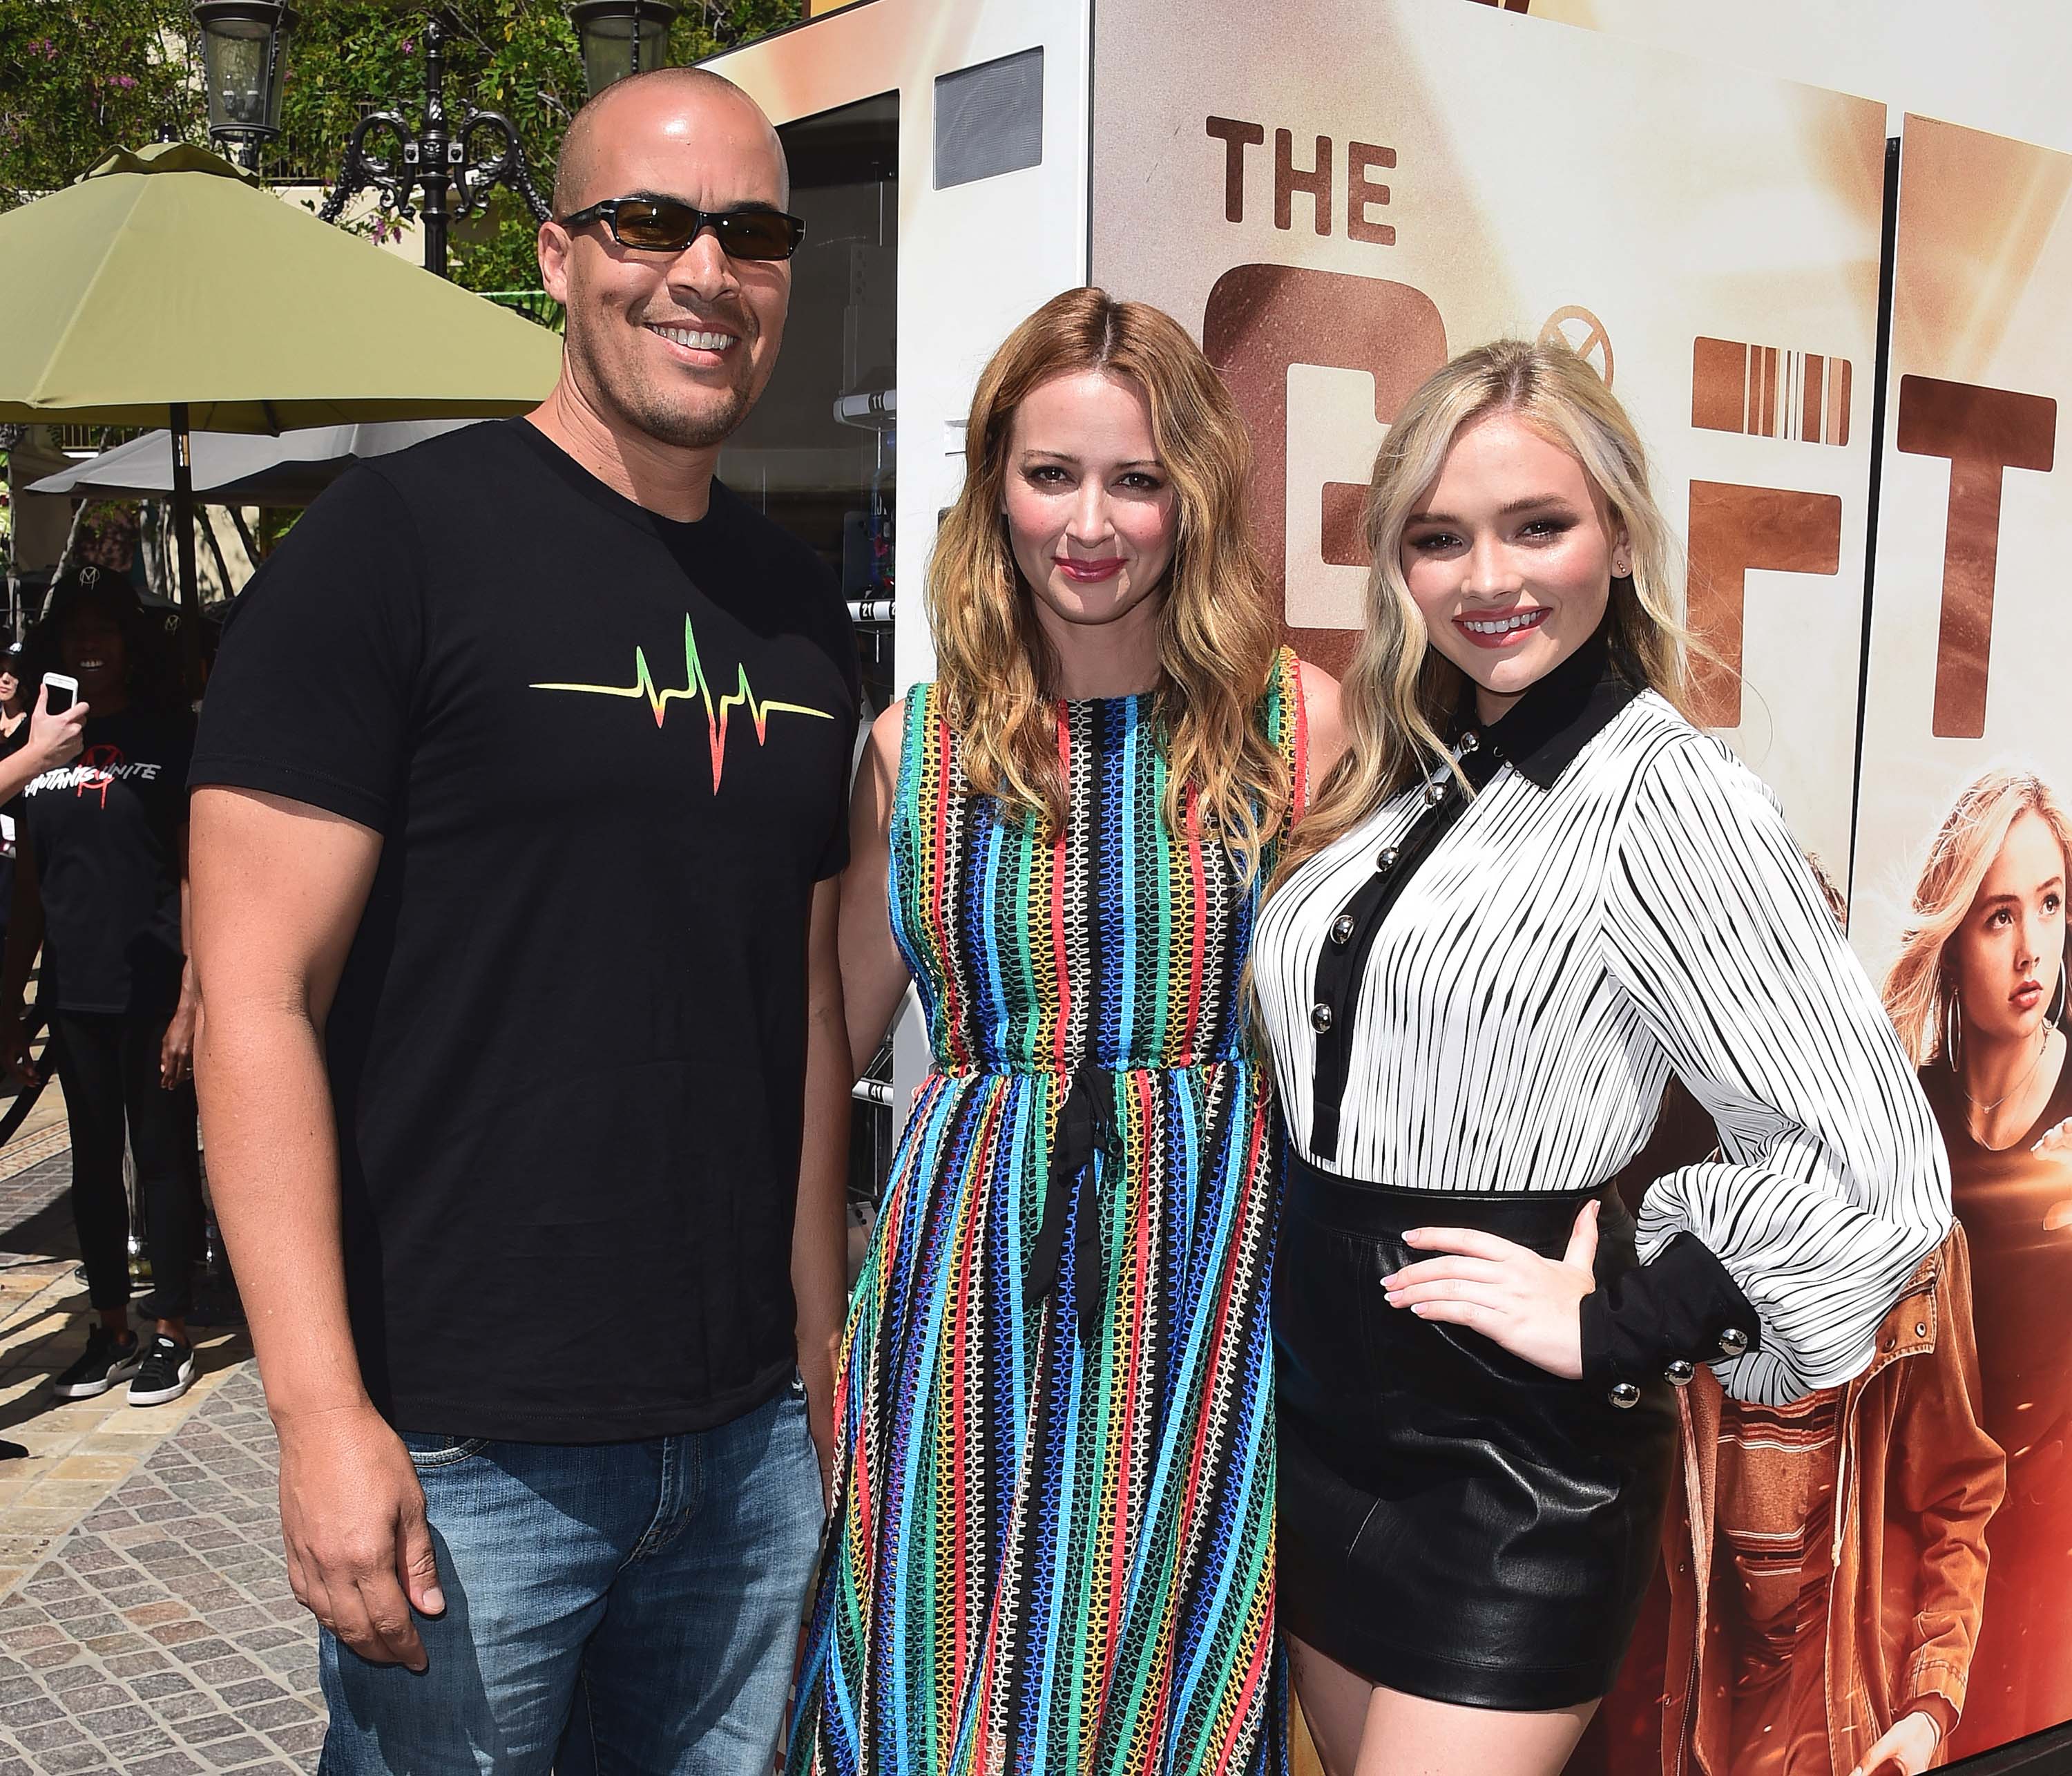 Natalie Alyn Lind attends The Gifted Vending Machine Stunt